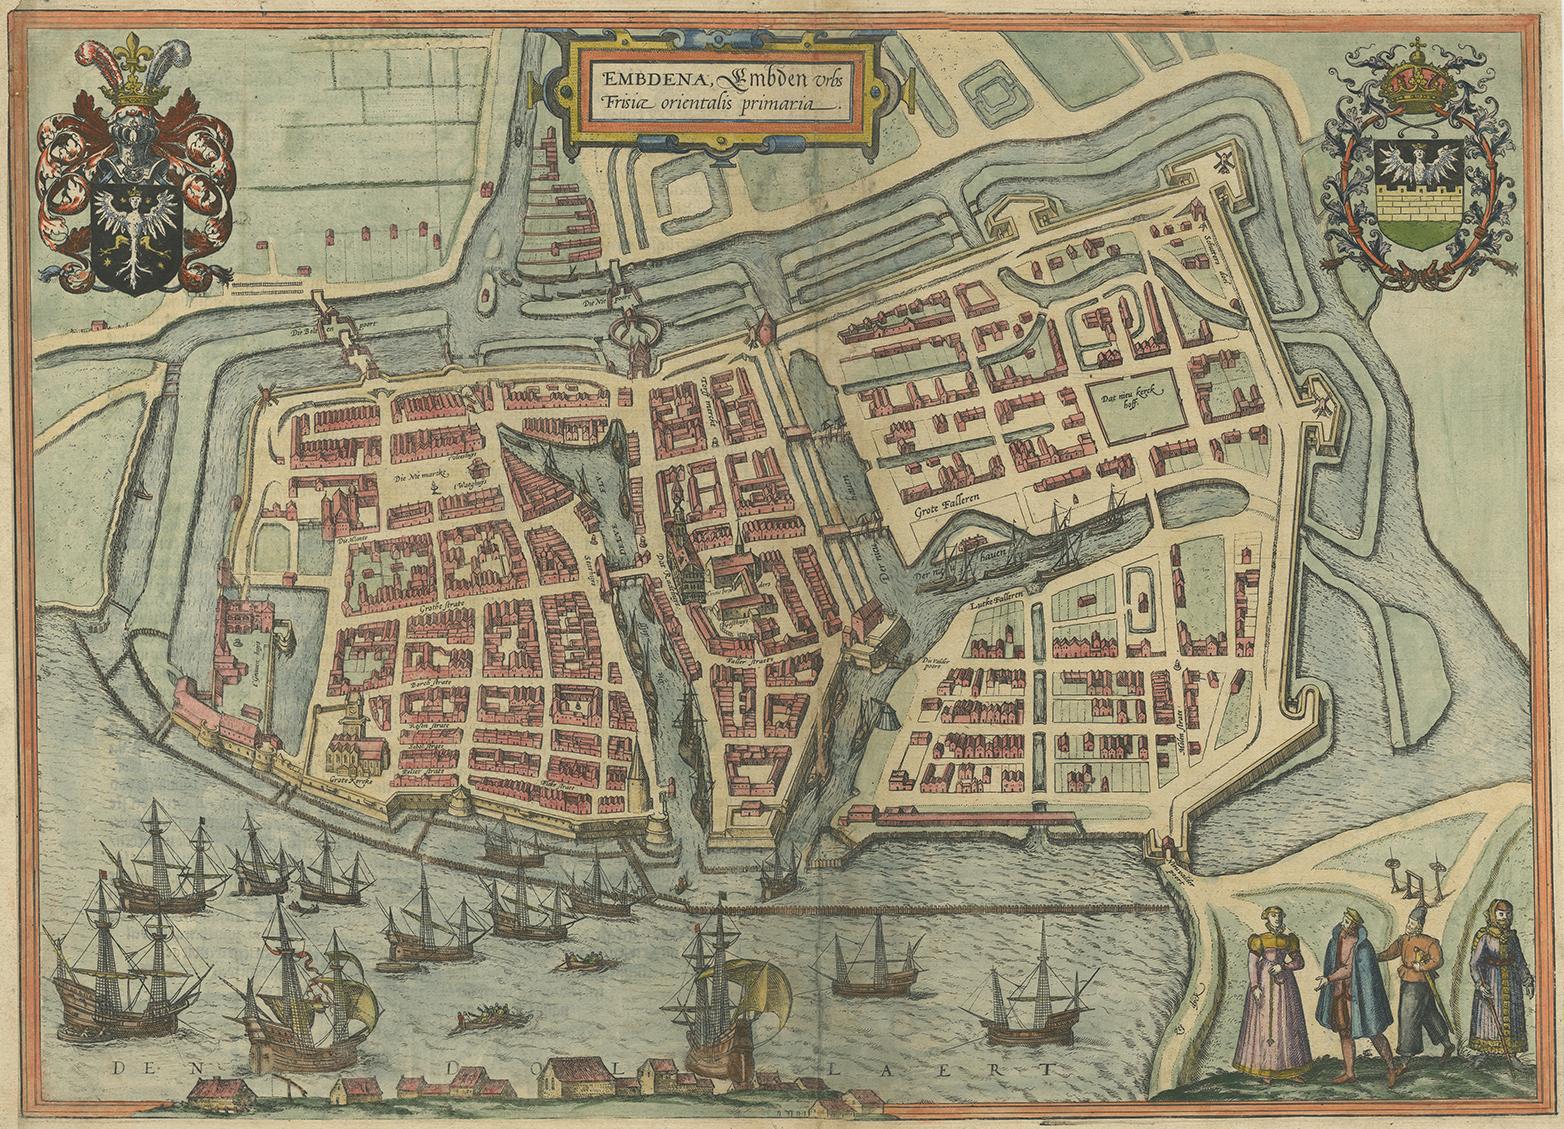 Antique map titled 'Embdena (..)'. Old, antique bird's-eye view plan of Emden, Germany. This bird's-eye view from the southwest over the Dollart shows Emden, which developed from a trading settlement in the 7th/8th centuries into a city as late as